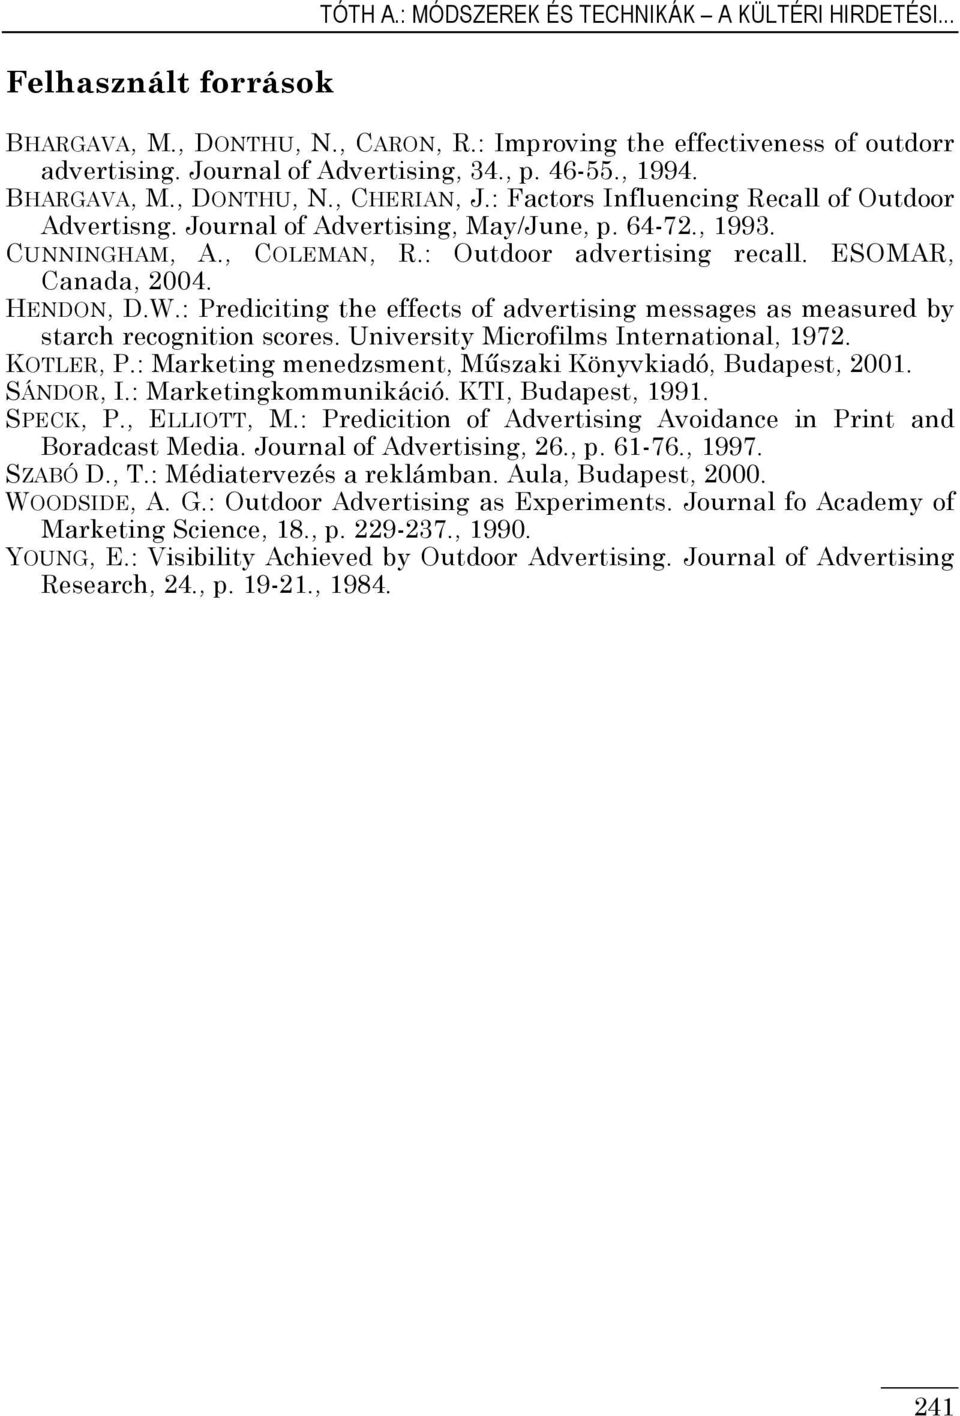 : Outdoor advertising recall. ESOMAR, Canada, 2004. HENDON, D.W.: Prediciting the effects of advertising messages as measured by starch recognition scores. University Microfilms International, 1972.